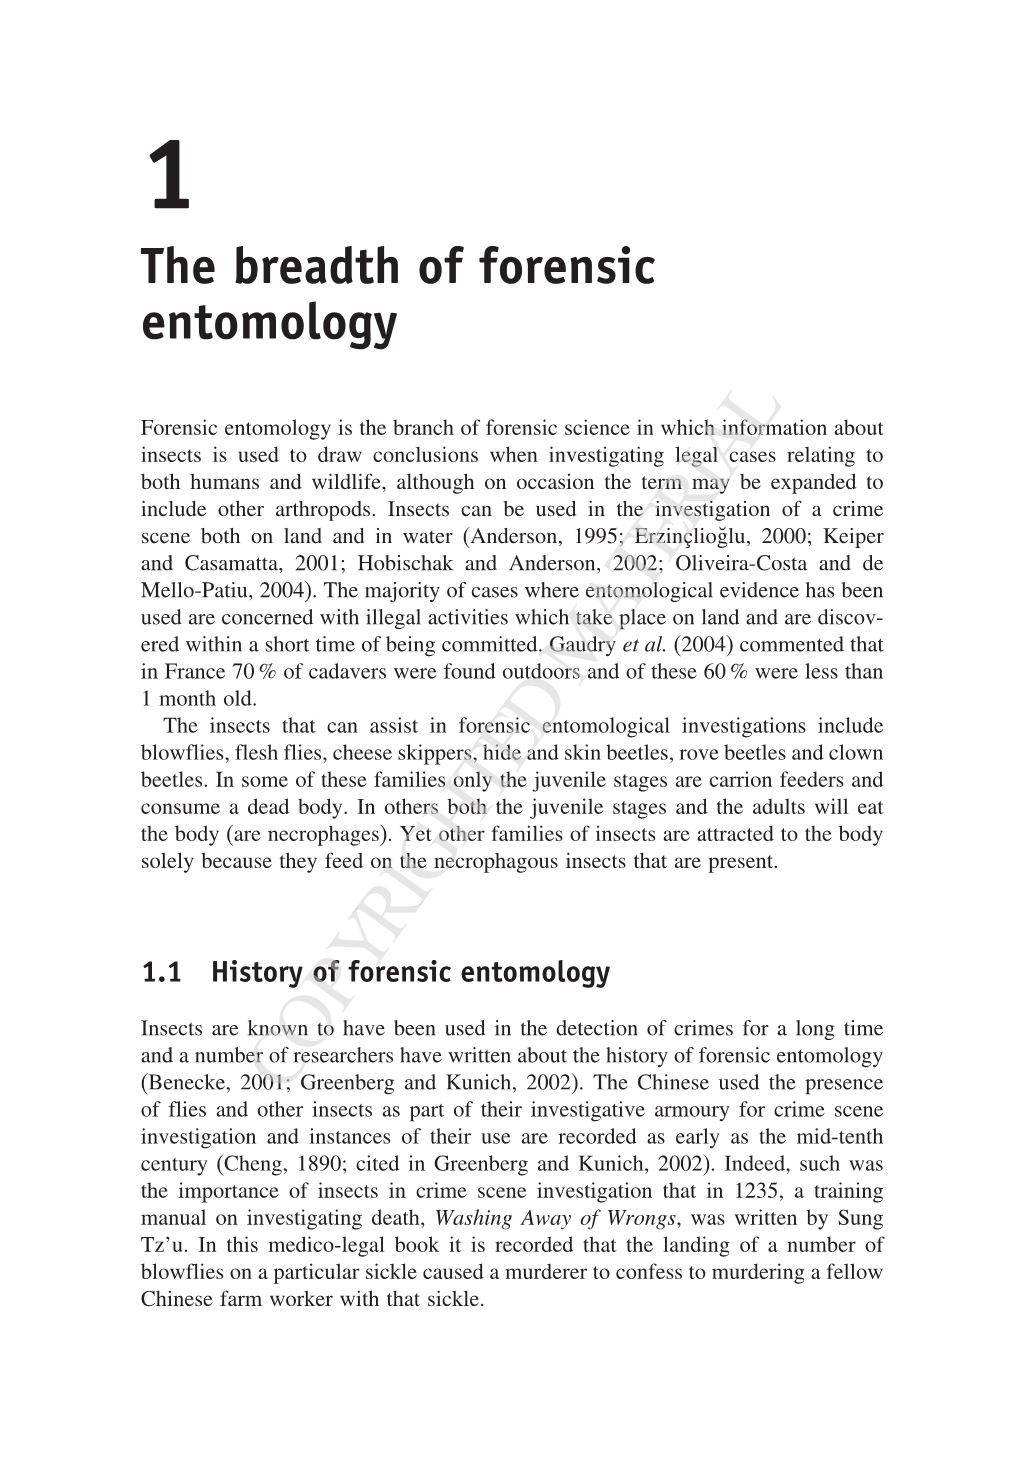 The Breadth of Forensic Entomology